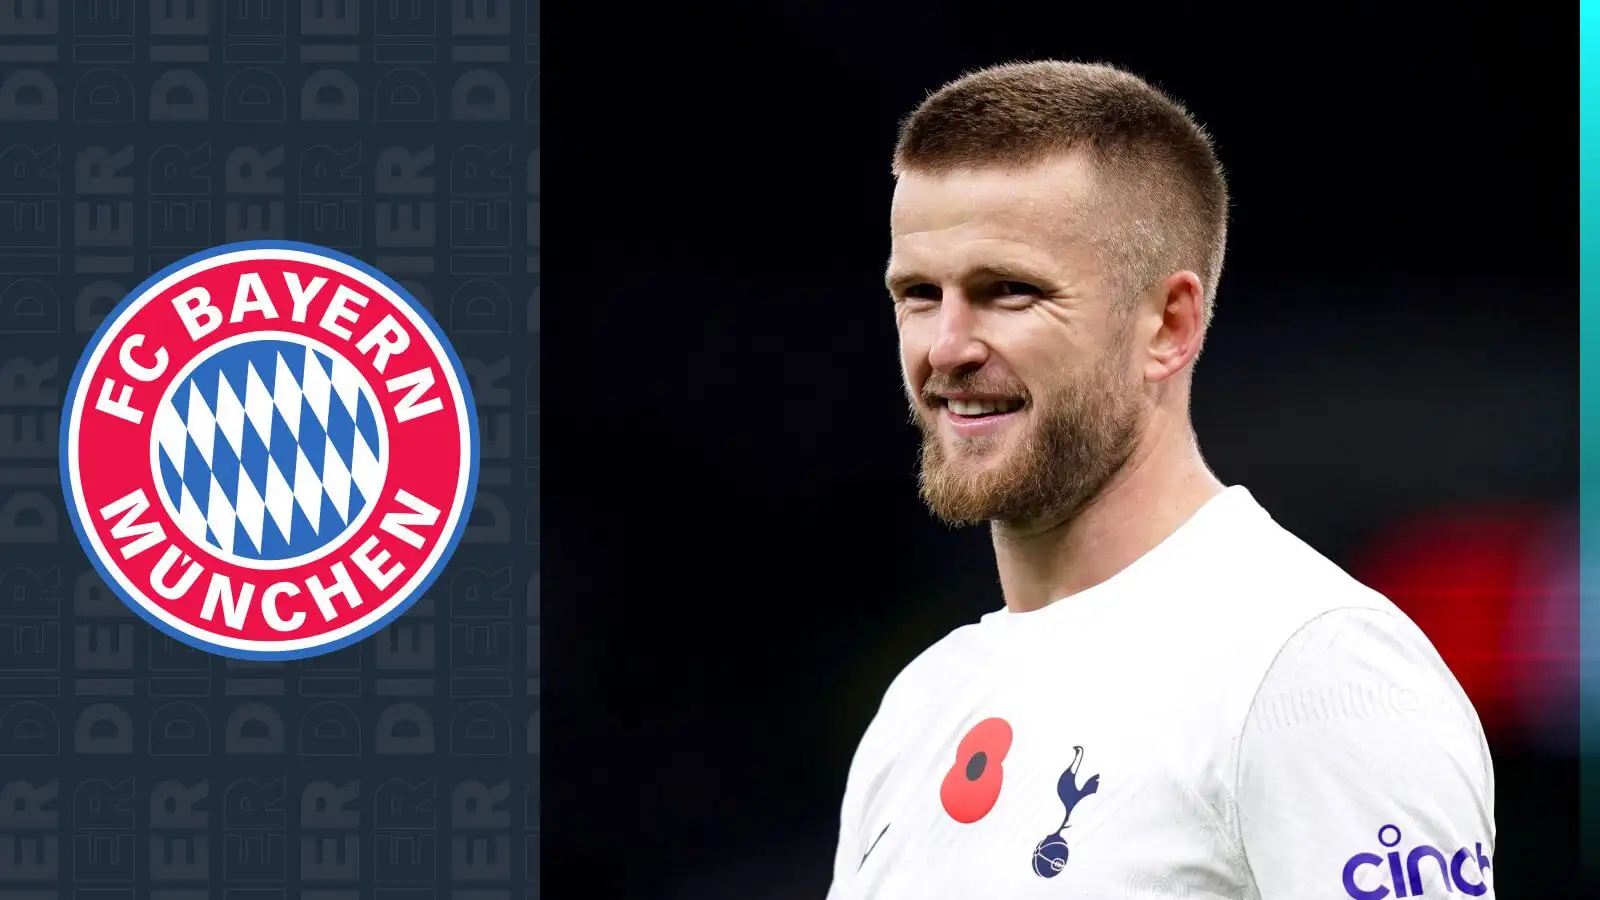 Tottenham outcast ‘in Munich to undergo medical’ as Tuchel confirms ‘specialist in defence’ will sign